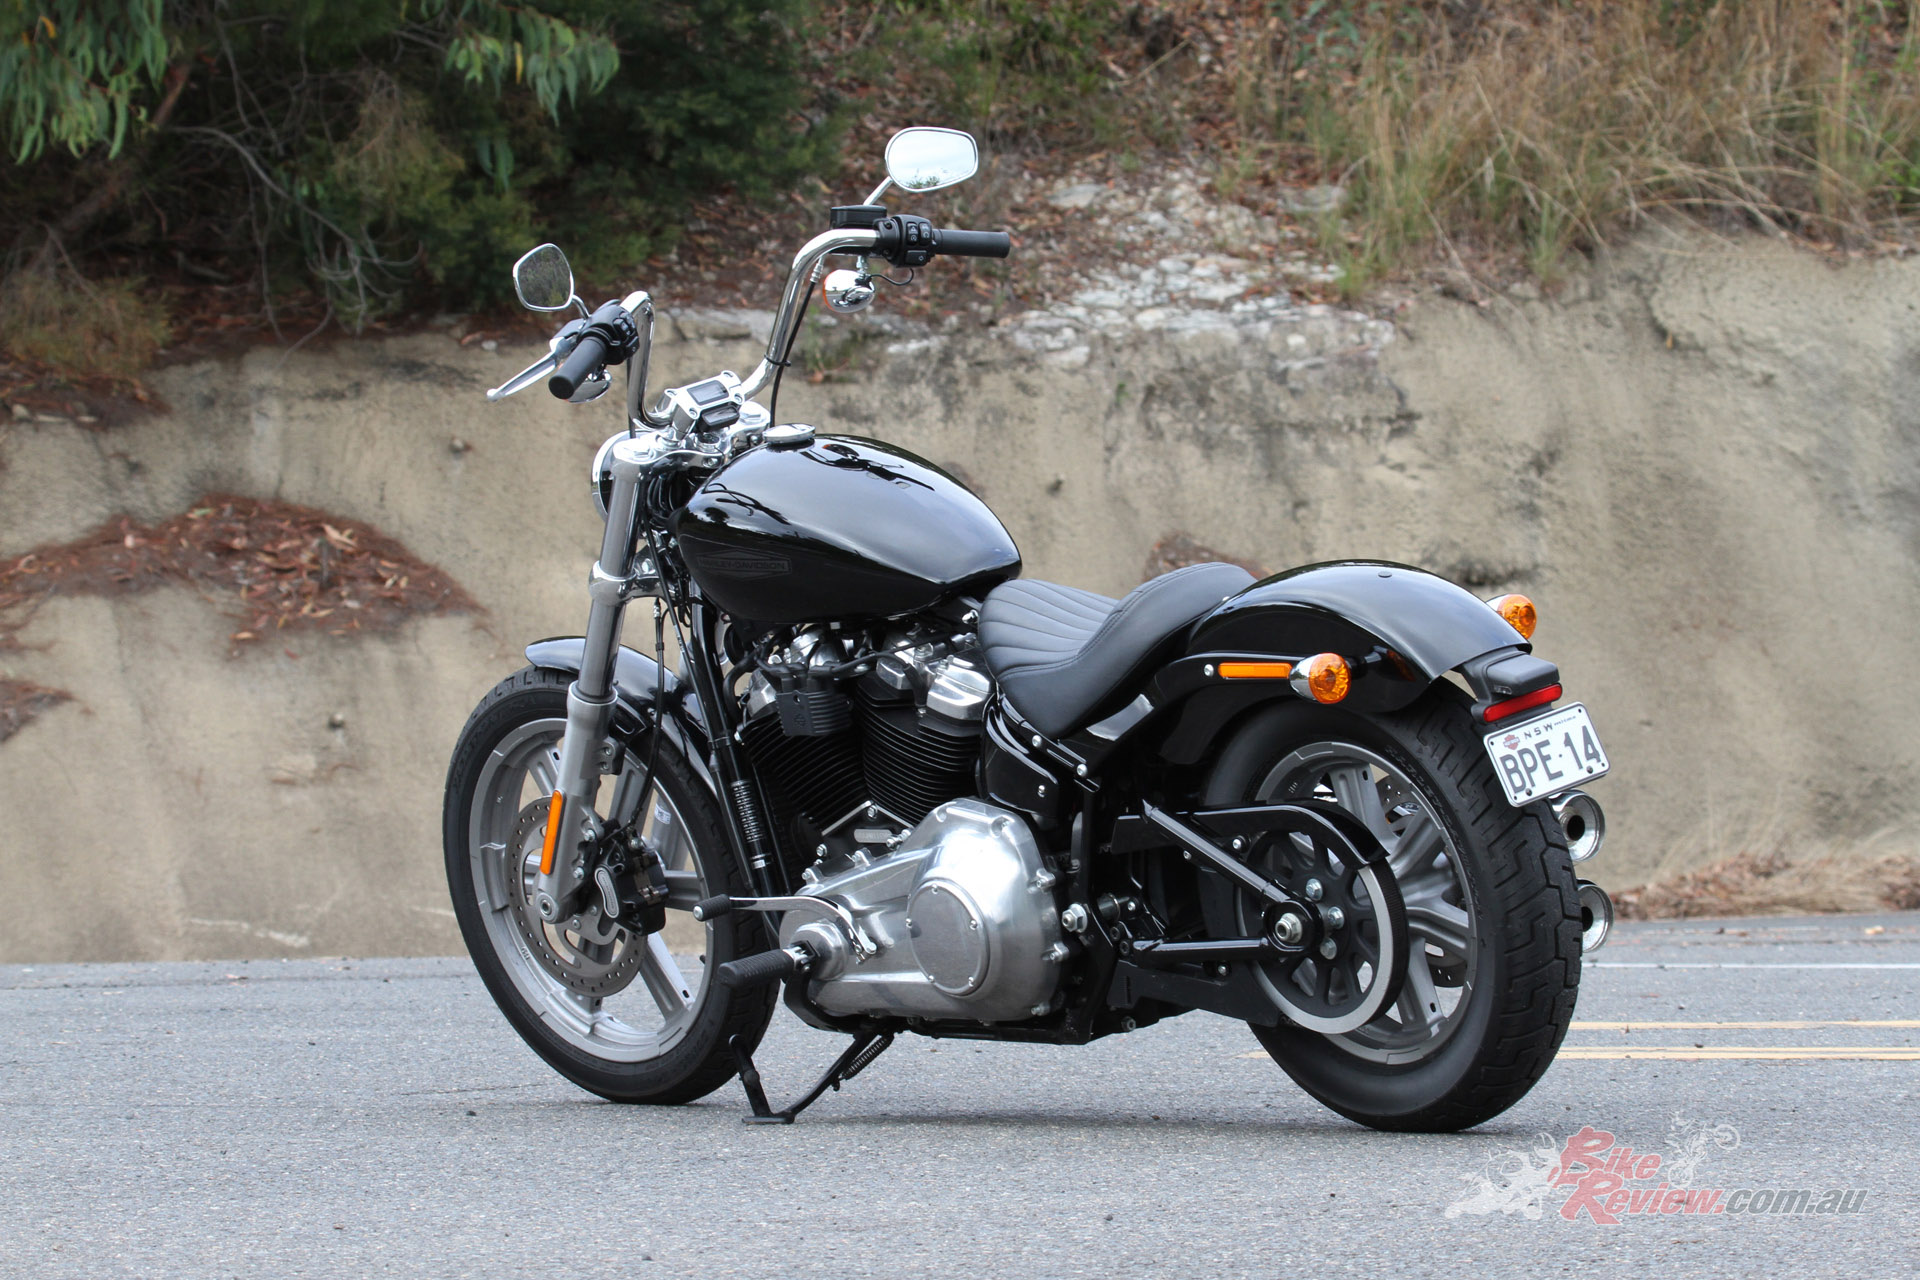 We are sad to see the Softail Standard go back to Harley, but we sure enjoyed the time spent with it.